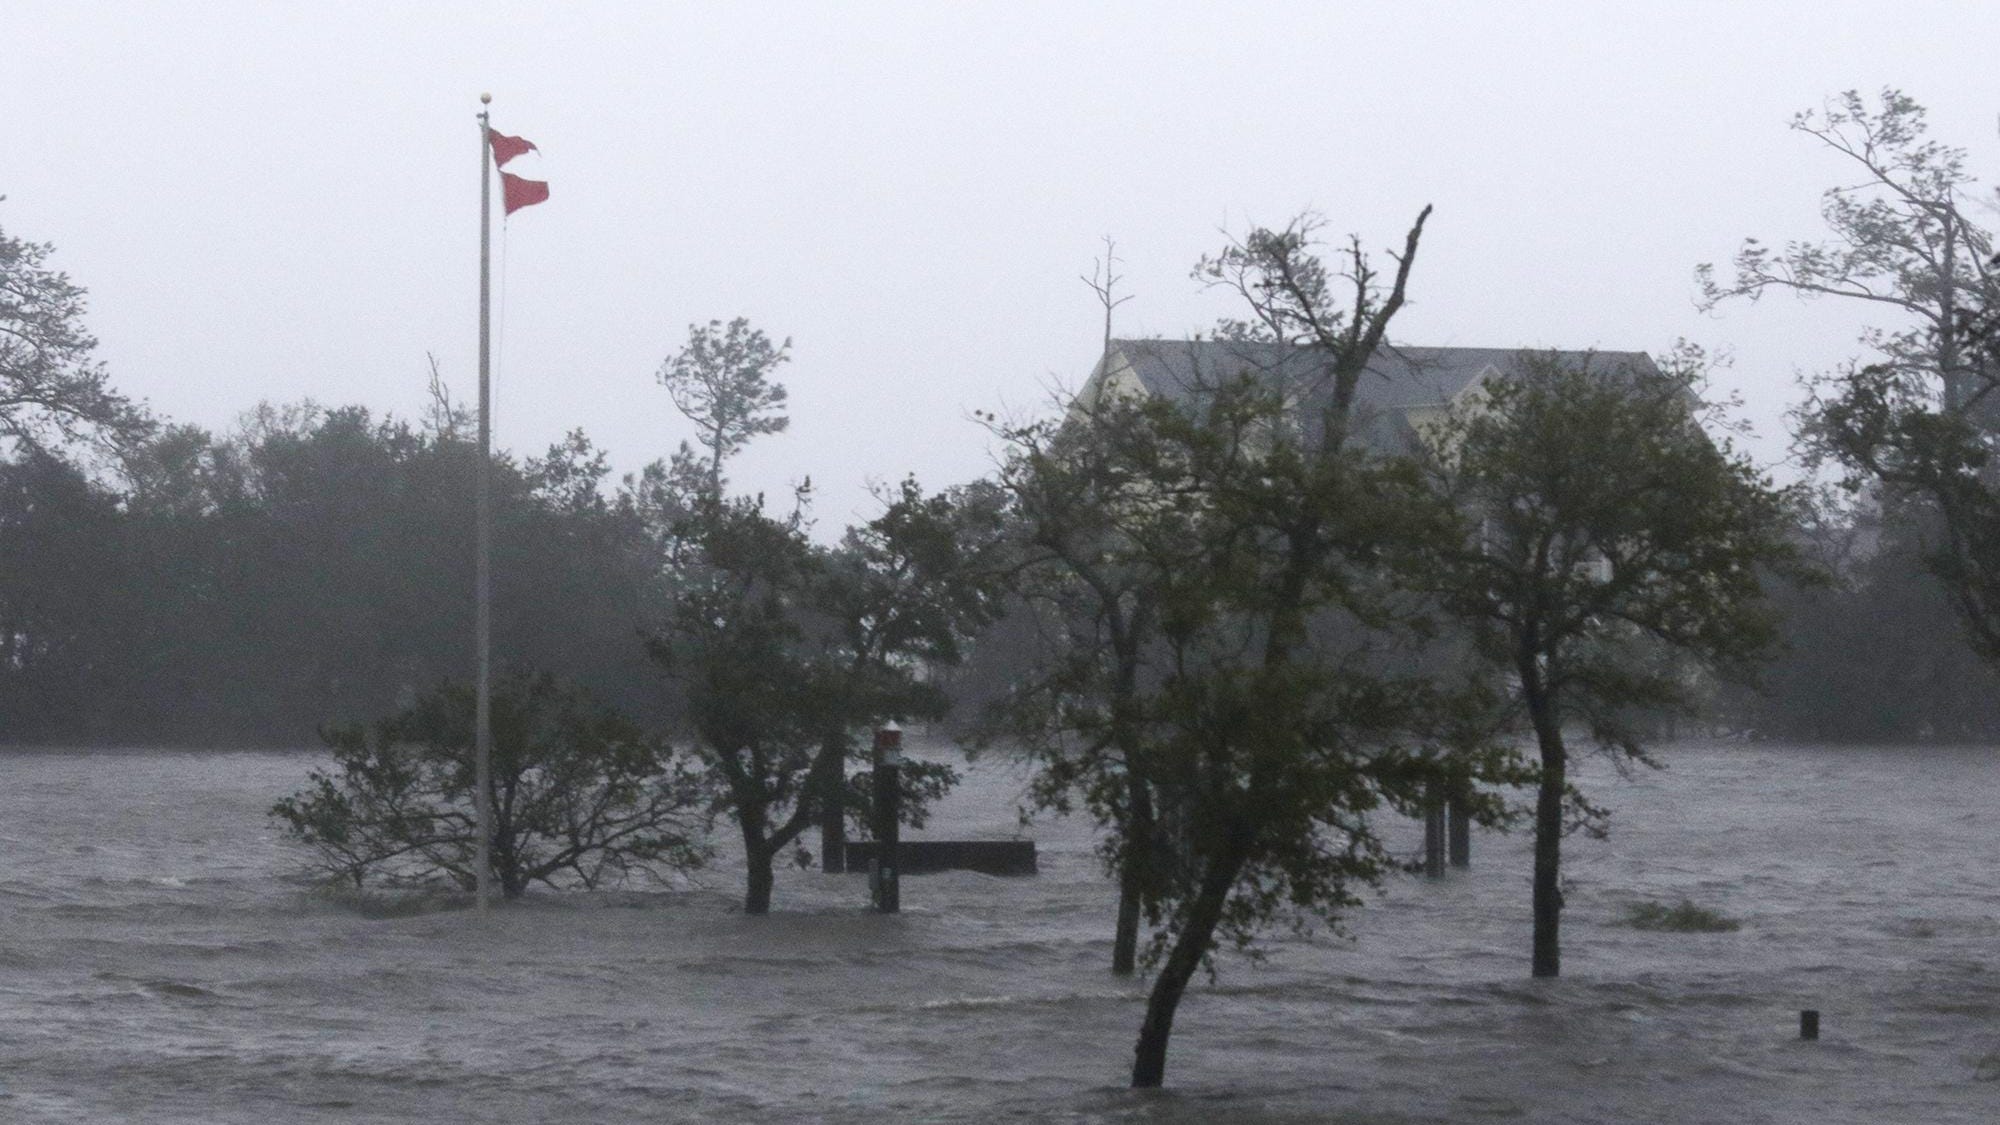 High winds and storm surge from Hurricane Florence hits Swansboro N.C.,Friday, Sept. 14, 2018. (AP Photo/Tom Copeland)